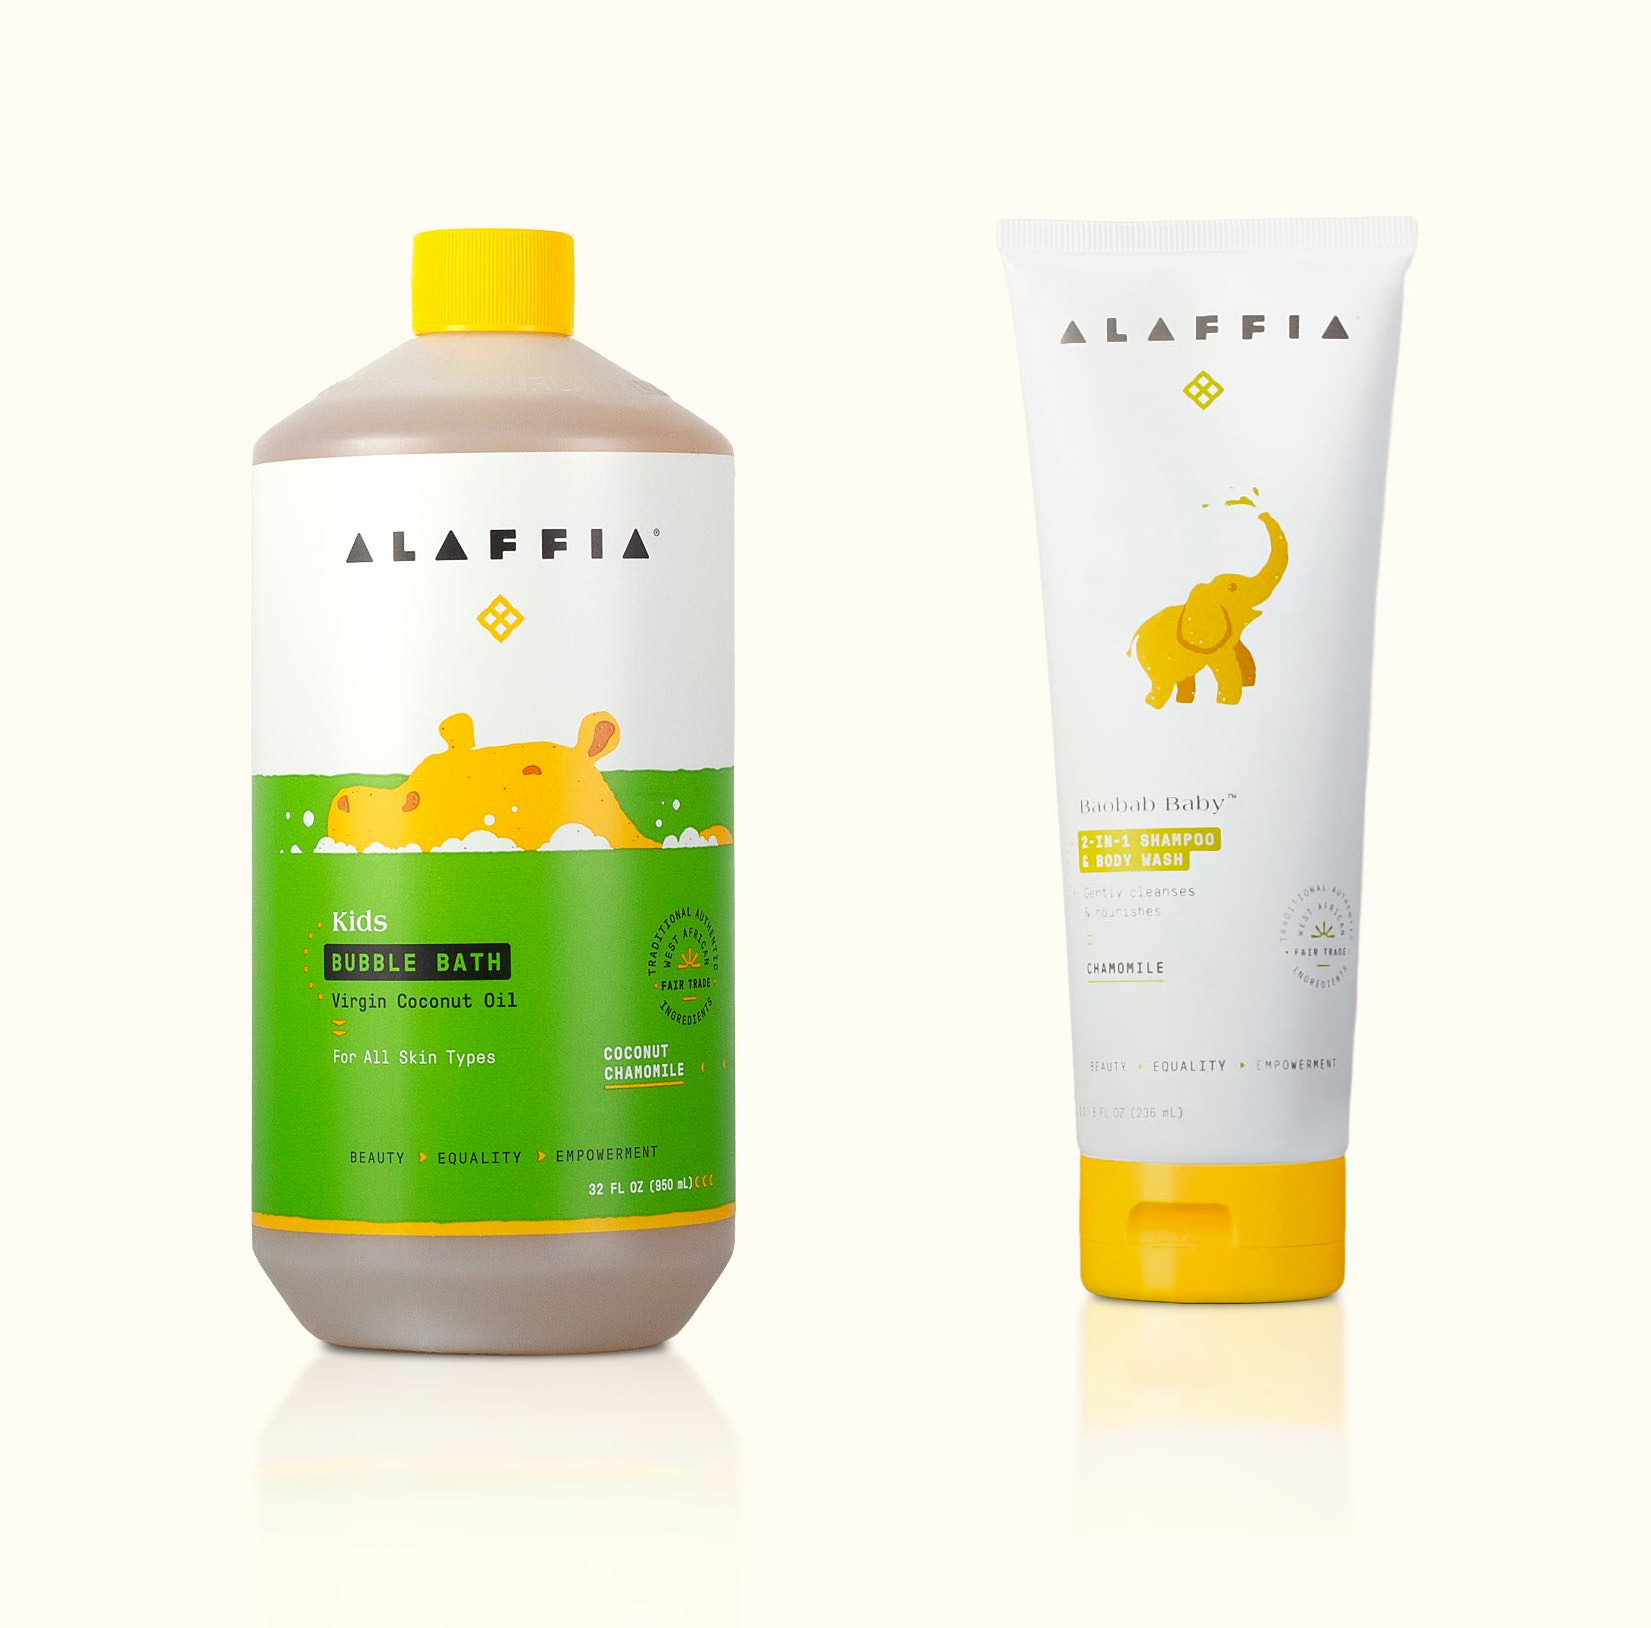 New Logo and Packaging for Alaffia by Chen Design Associates